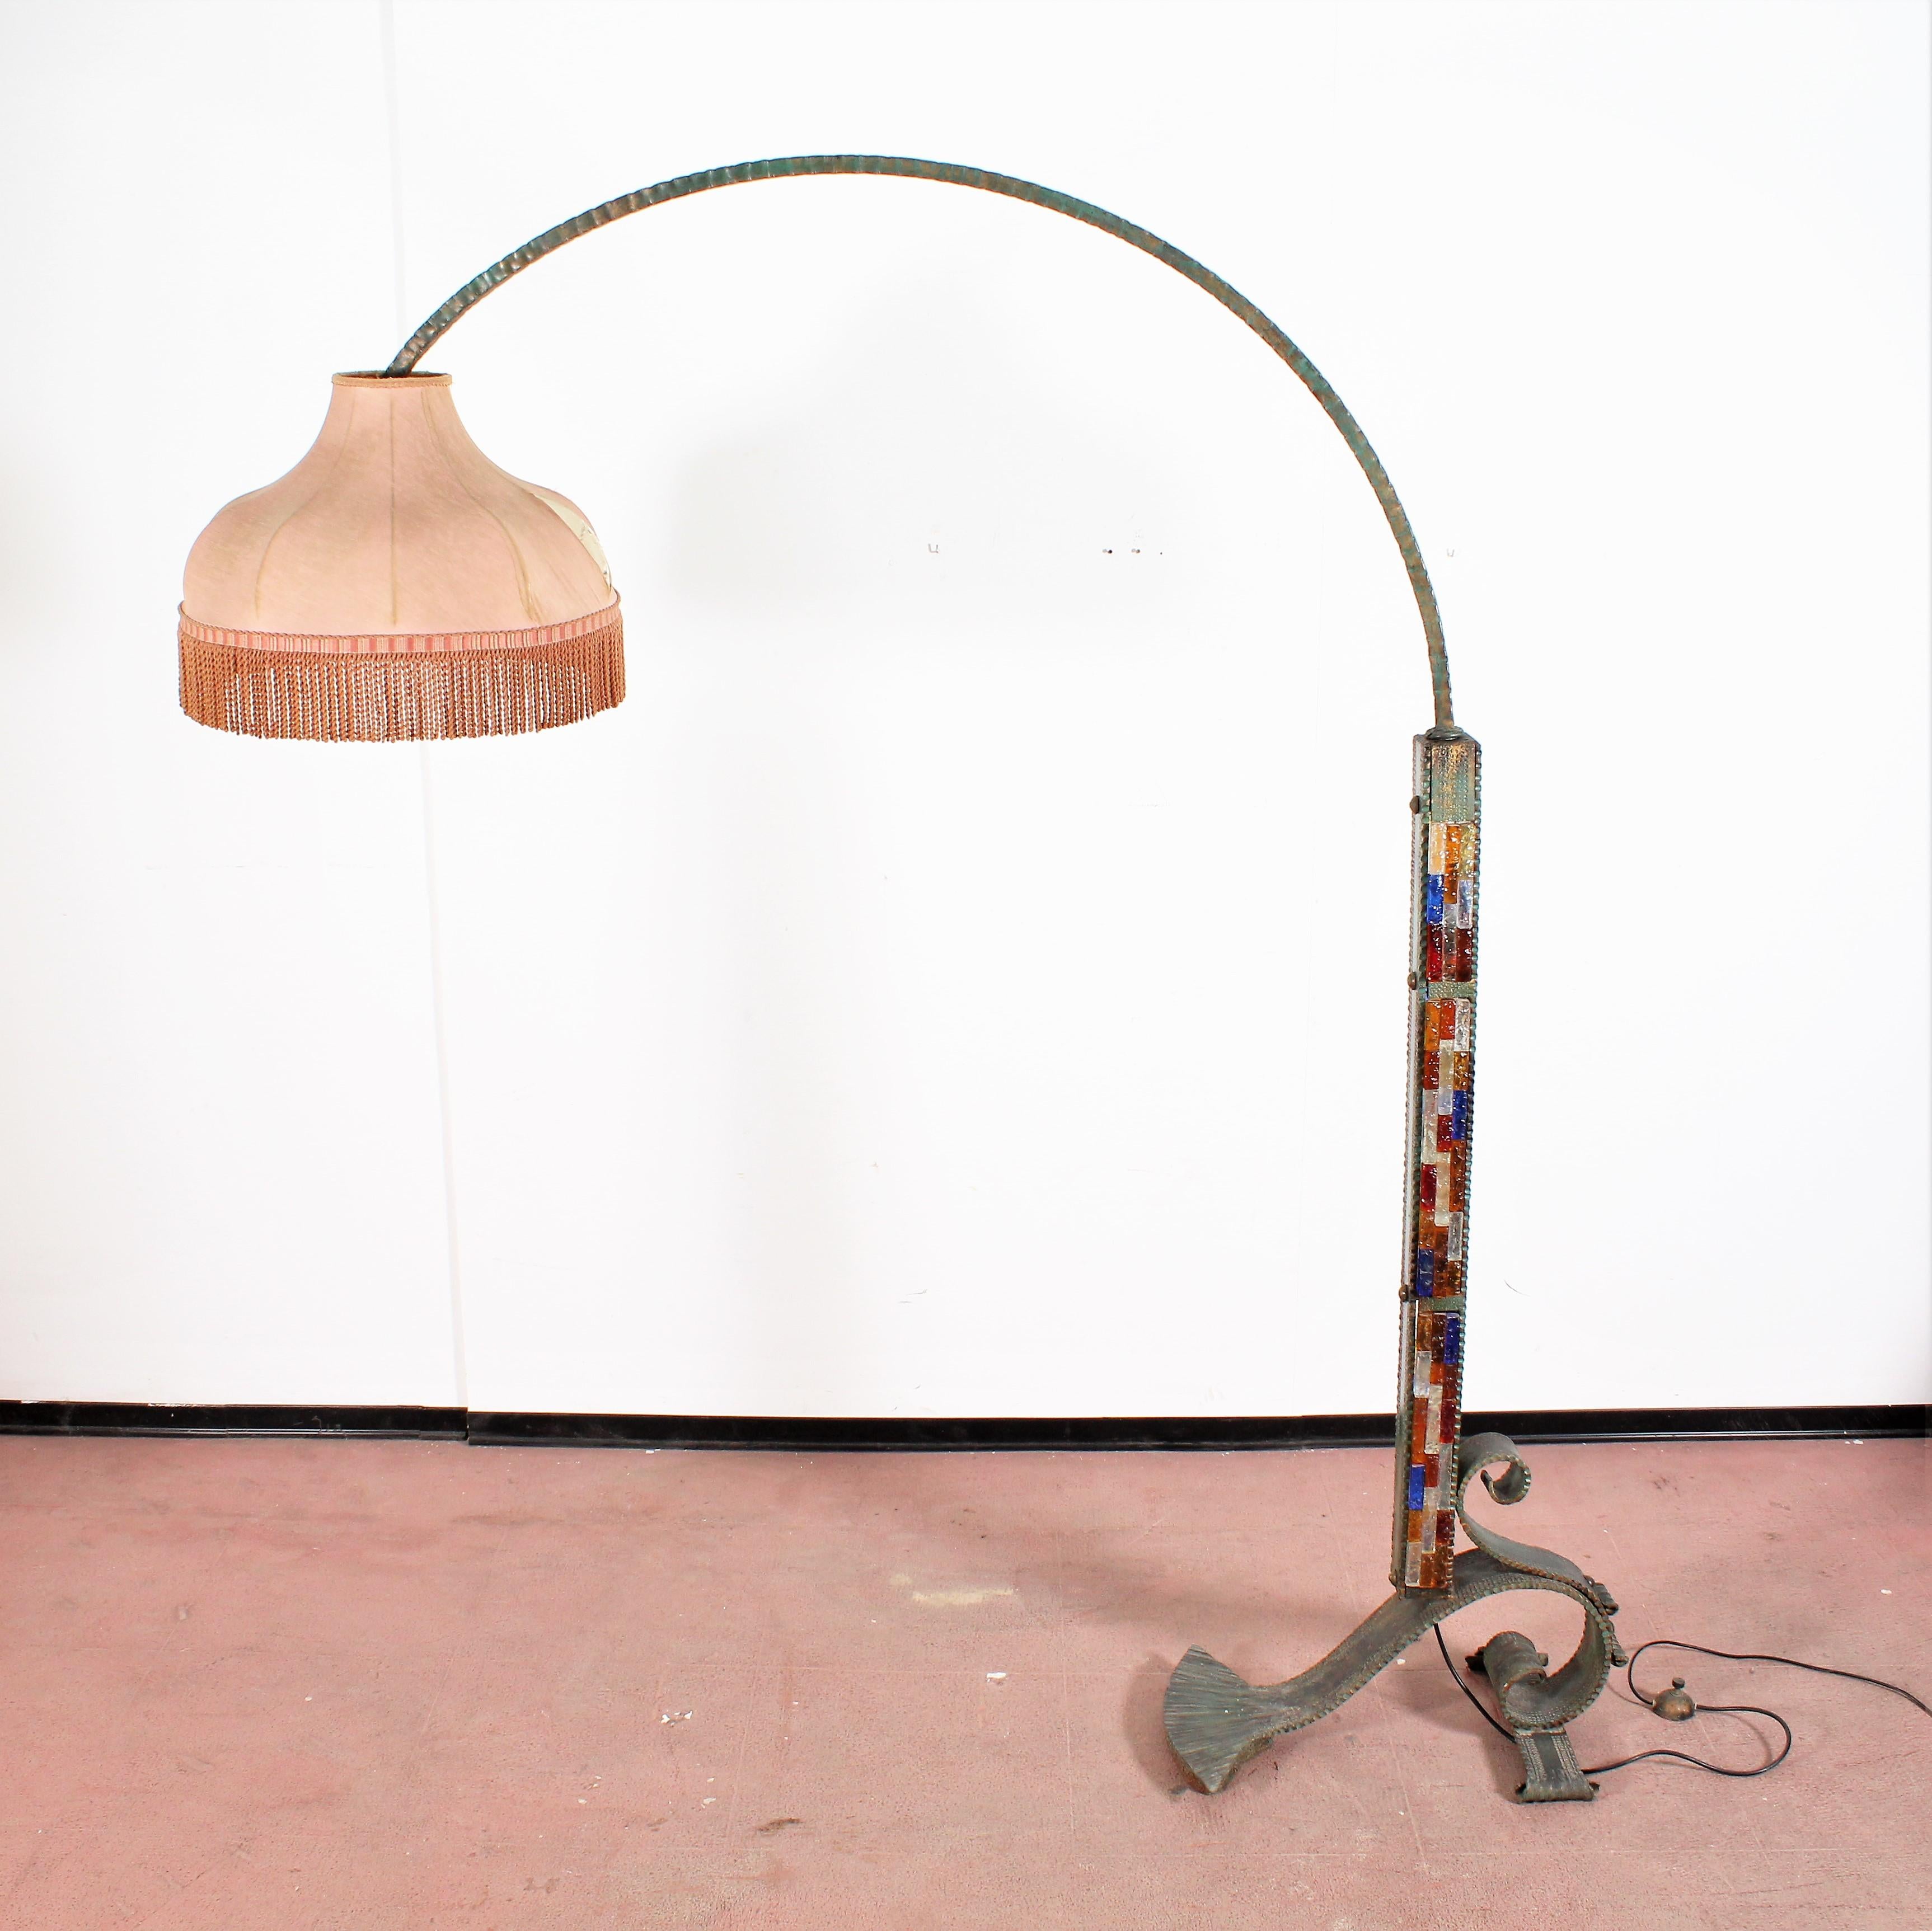 Prestigious and impressive brutalist style wrought iron floor lamp with
polychrome chiselled Murano glasses by PoliArte Venezia, 1960s. Peach-colored fabric shade. Amazing colorful light effects!
Wear consistent with age and use.